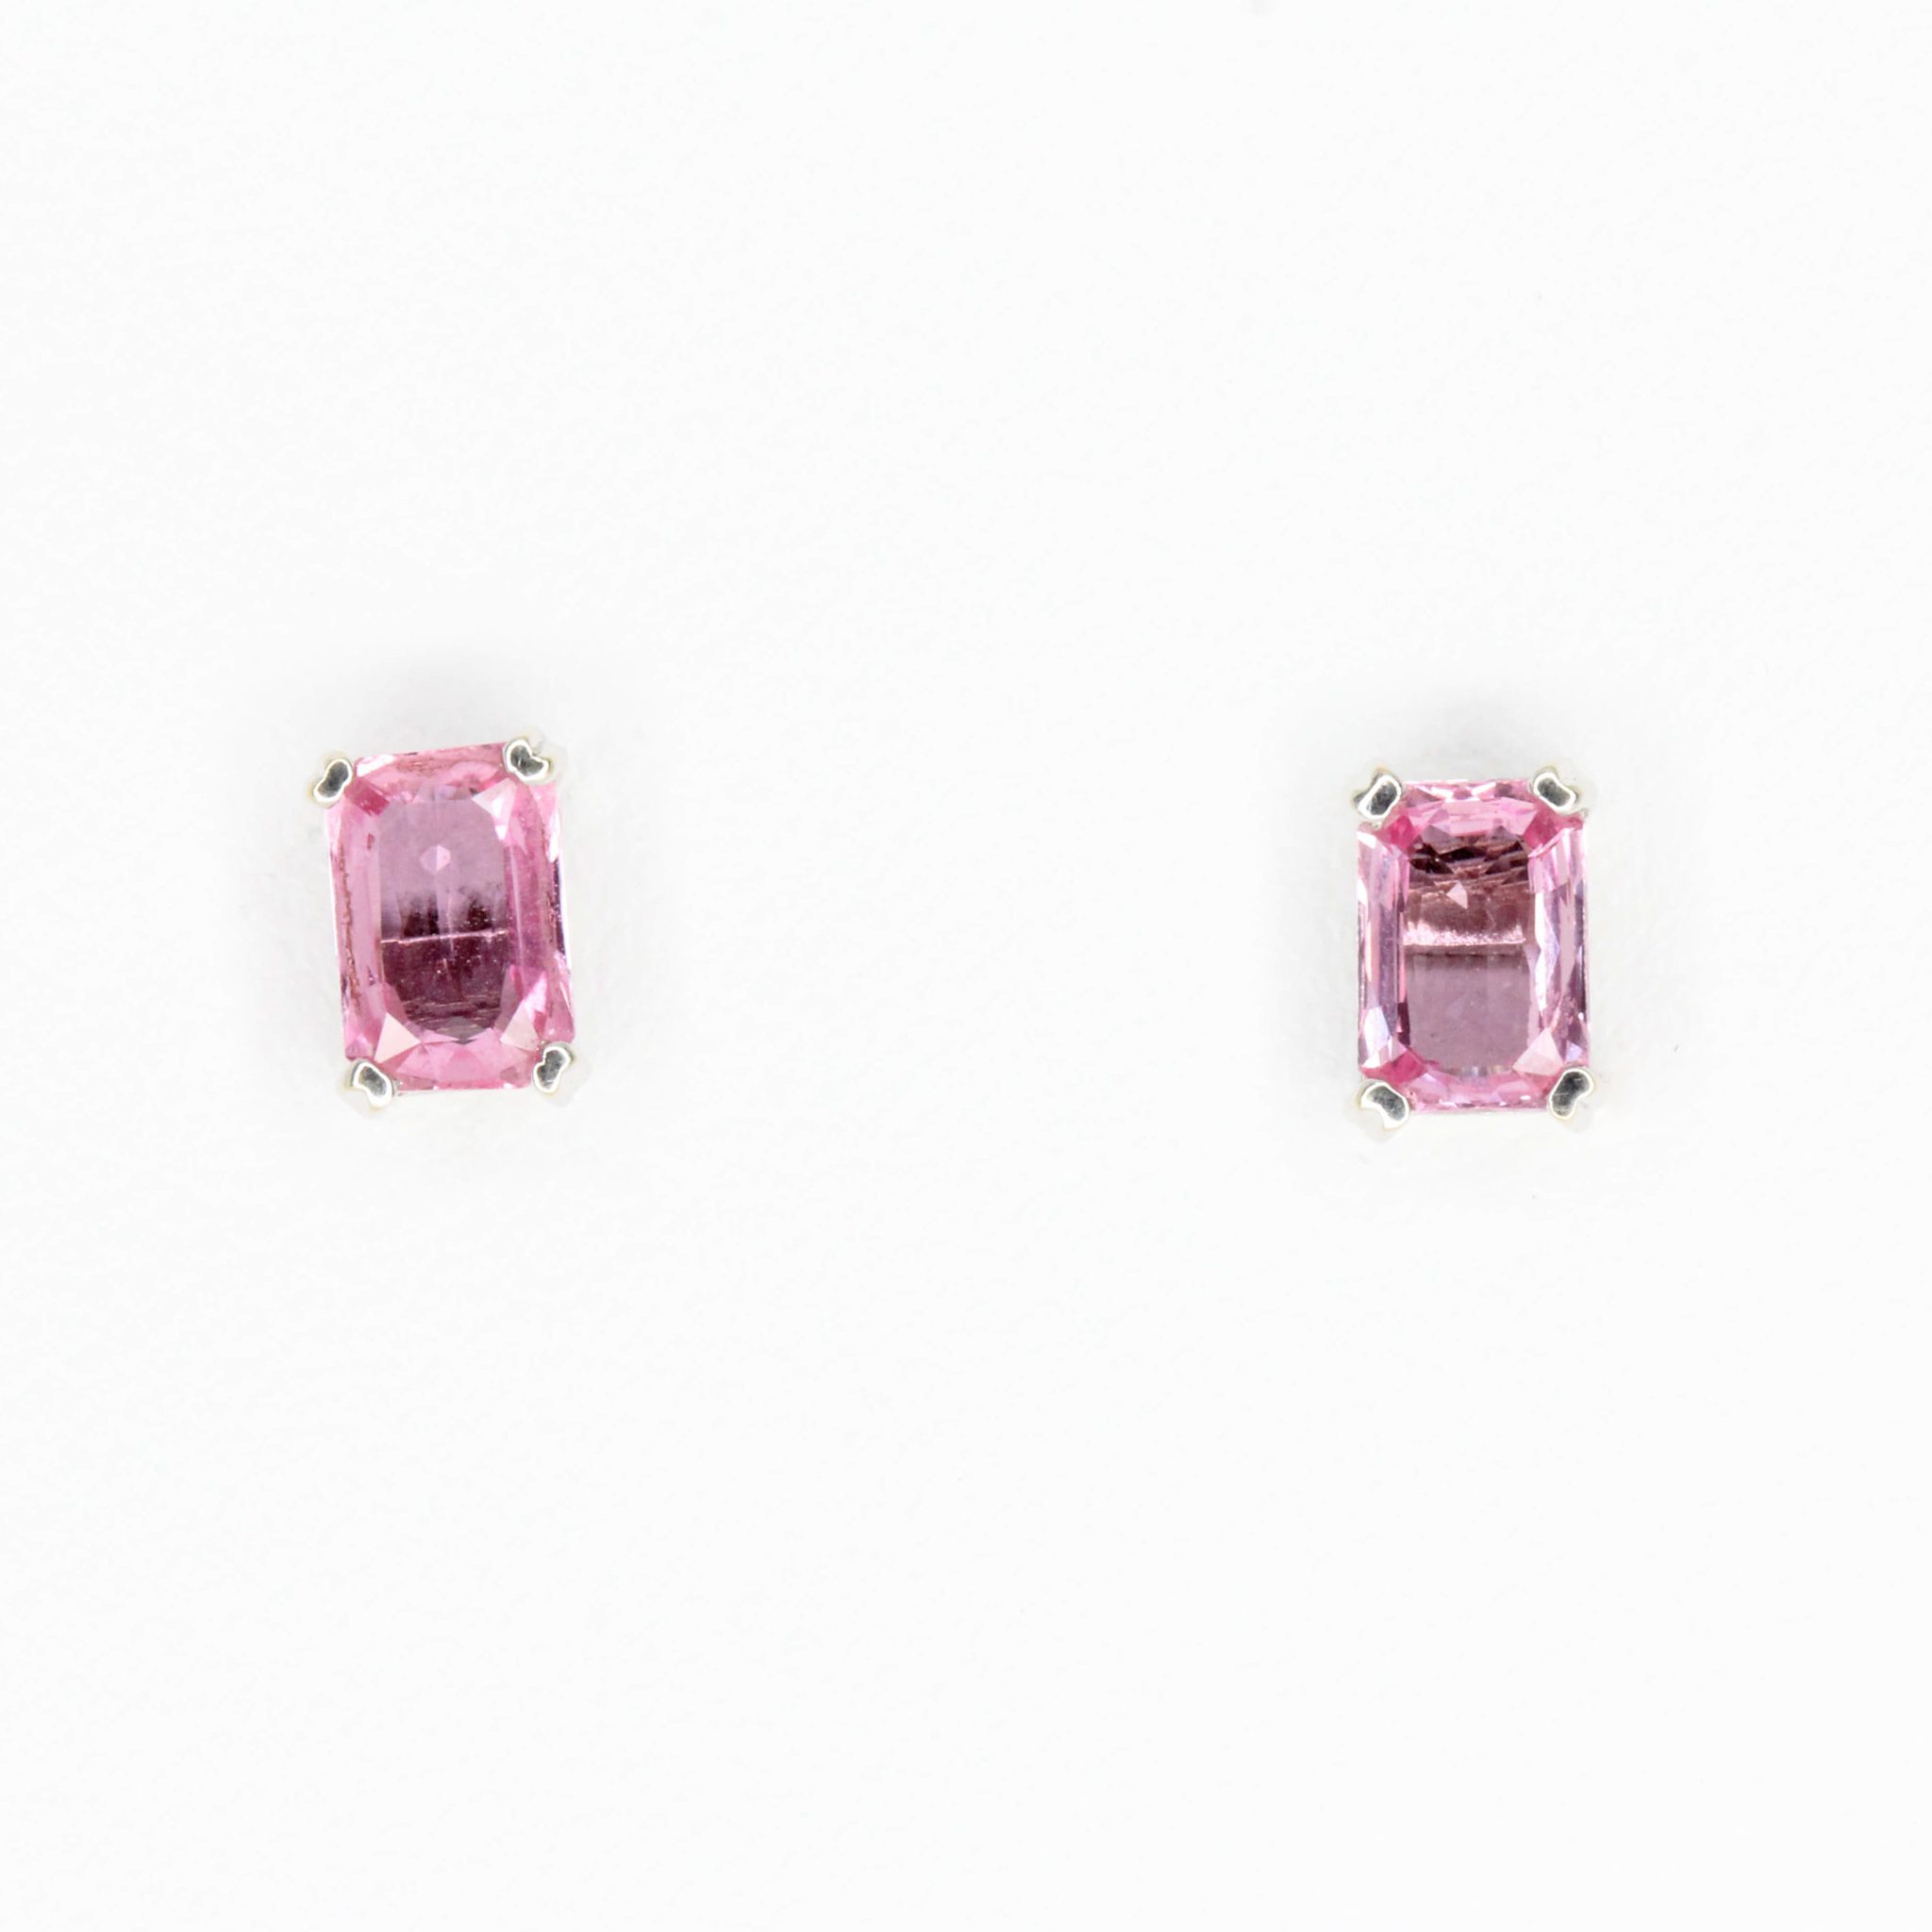 18ct White Gold Pink Sapphire and Diamond Earrings | Allgem Jewellers